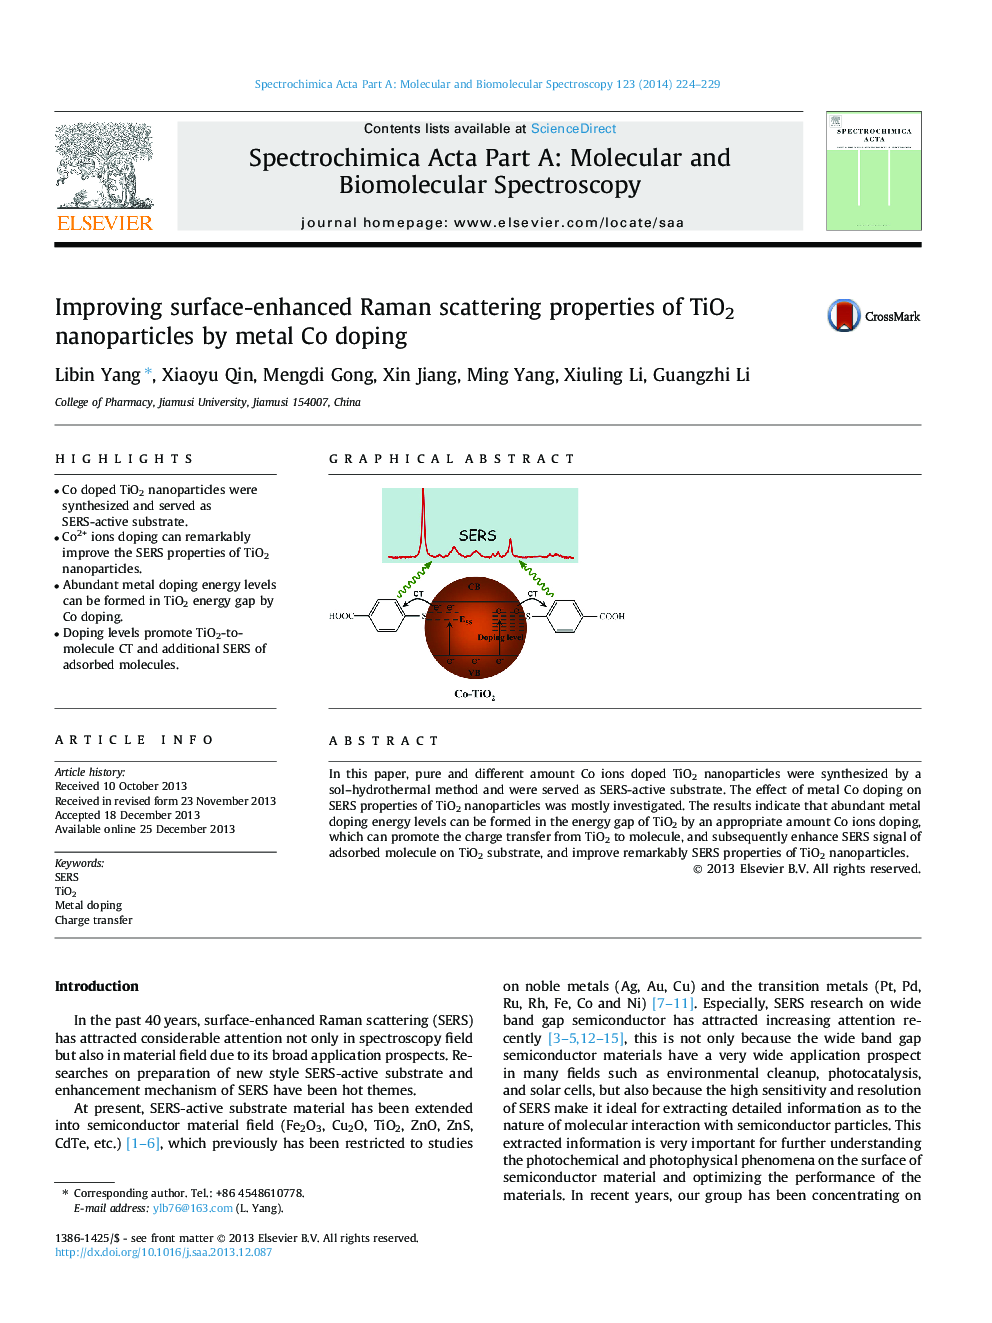 Improving surface-enhanced Raman scattering properties of TiO2 nanoparticles by metal Co doping